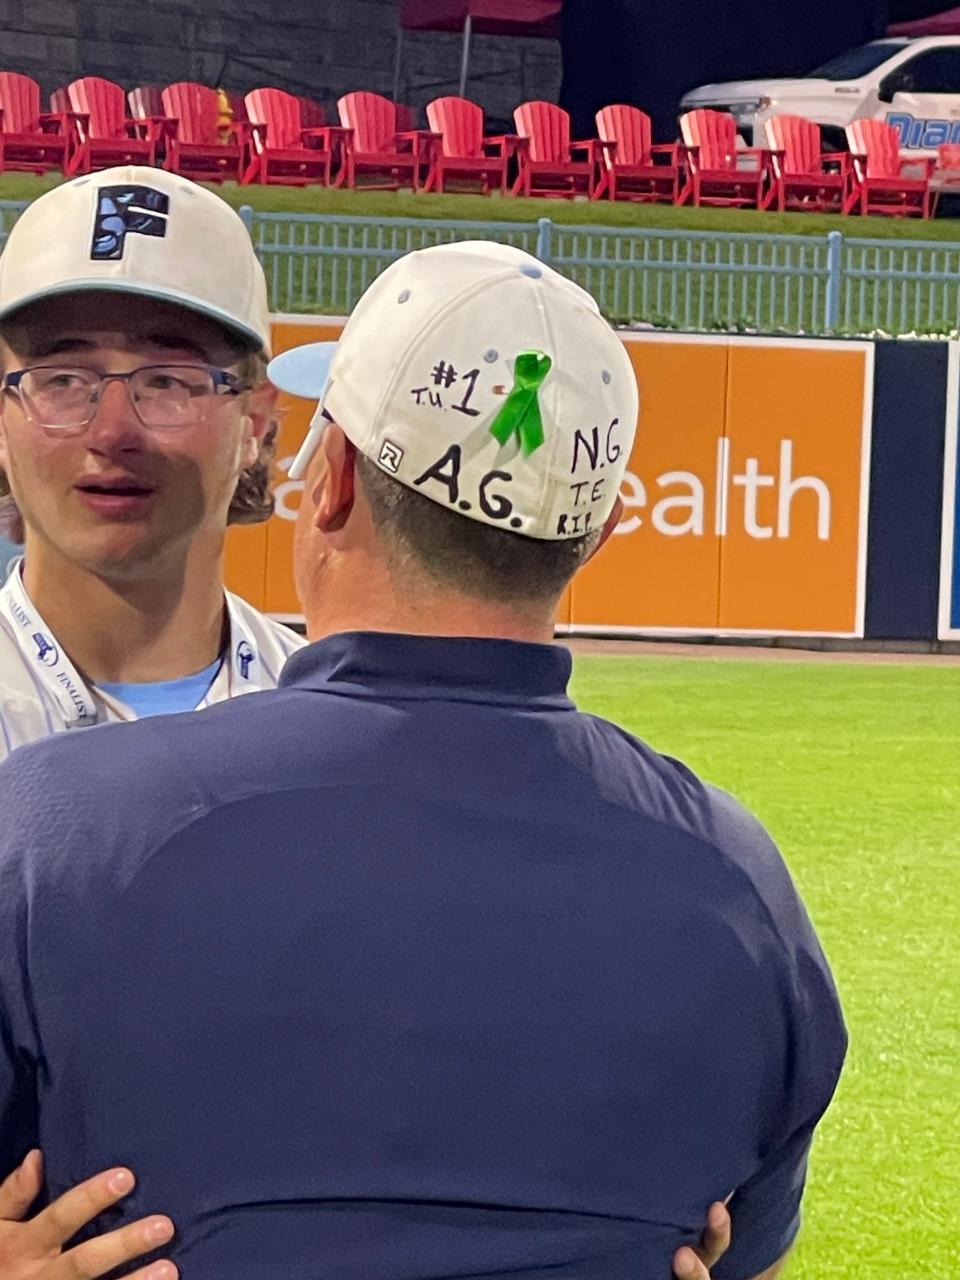 Franklin baseball coach Zach Brown hugged each one of his players after the Panthers fell to Taunton in Sunday's state championship game. His hat is covered with the initials of Anthony Gates and Nick Gaspar, who both died during the season.